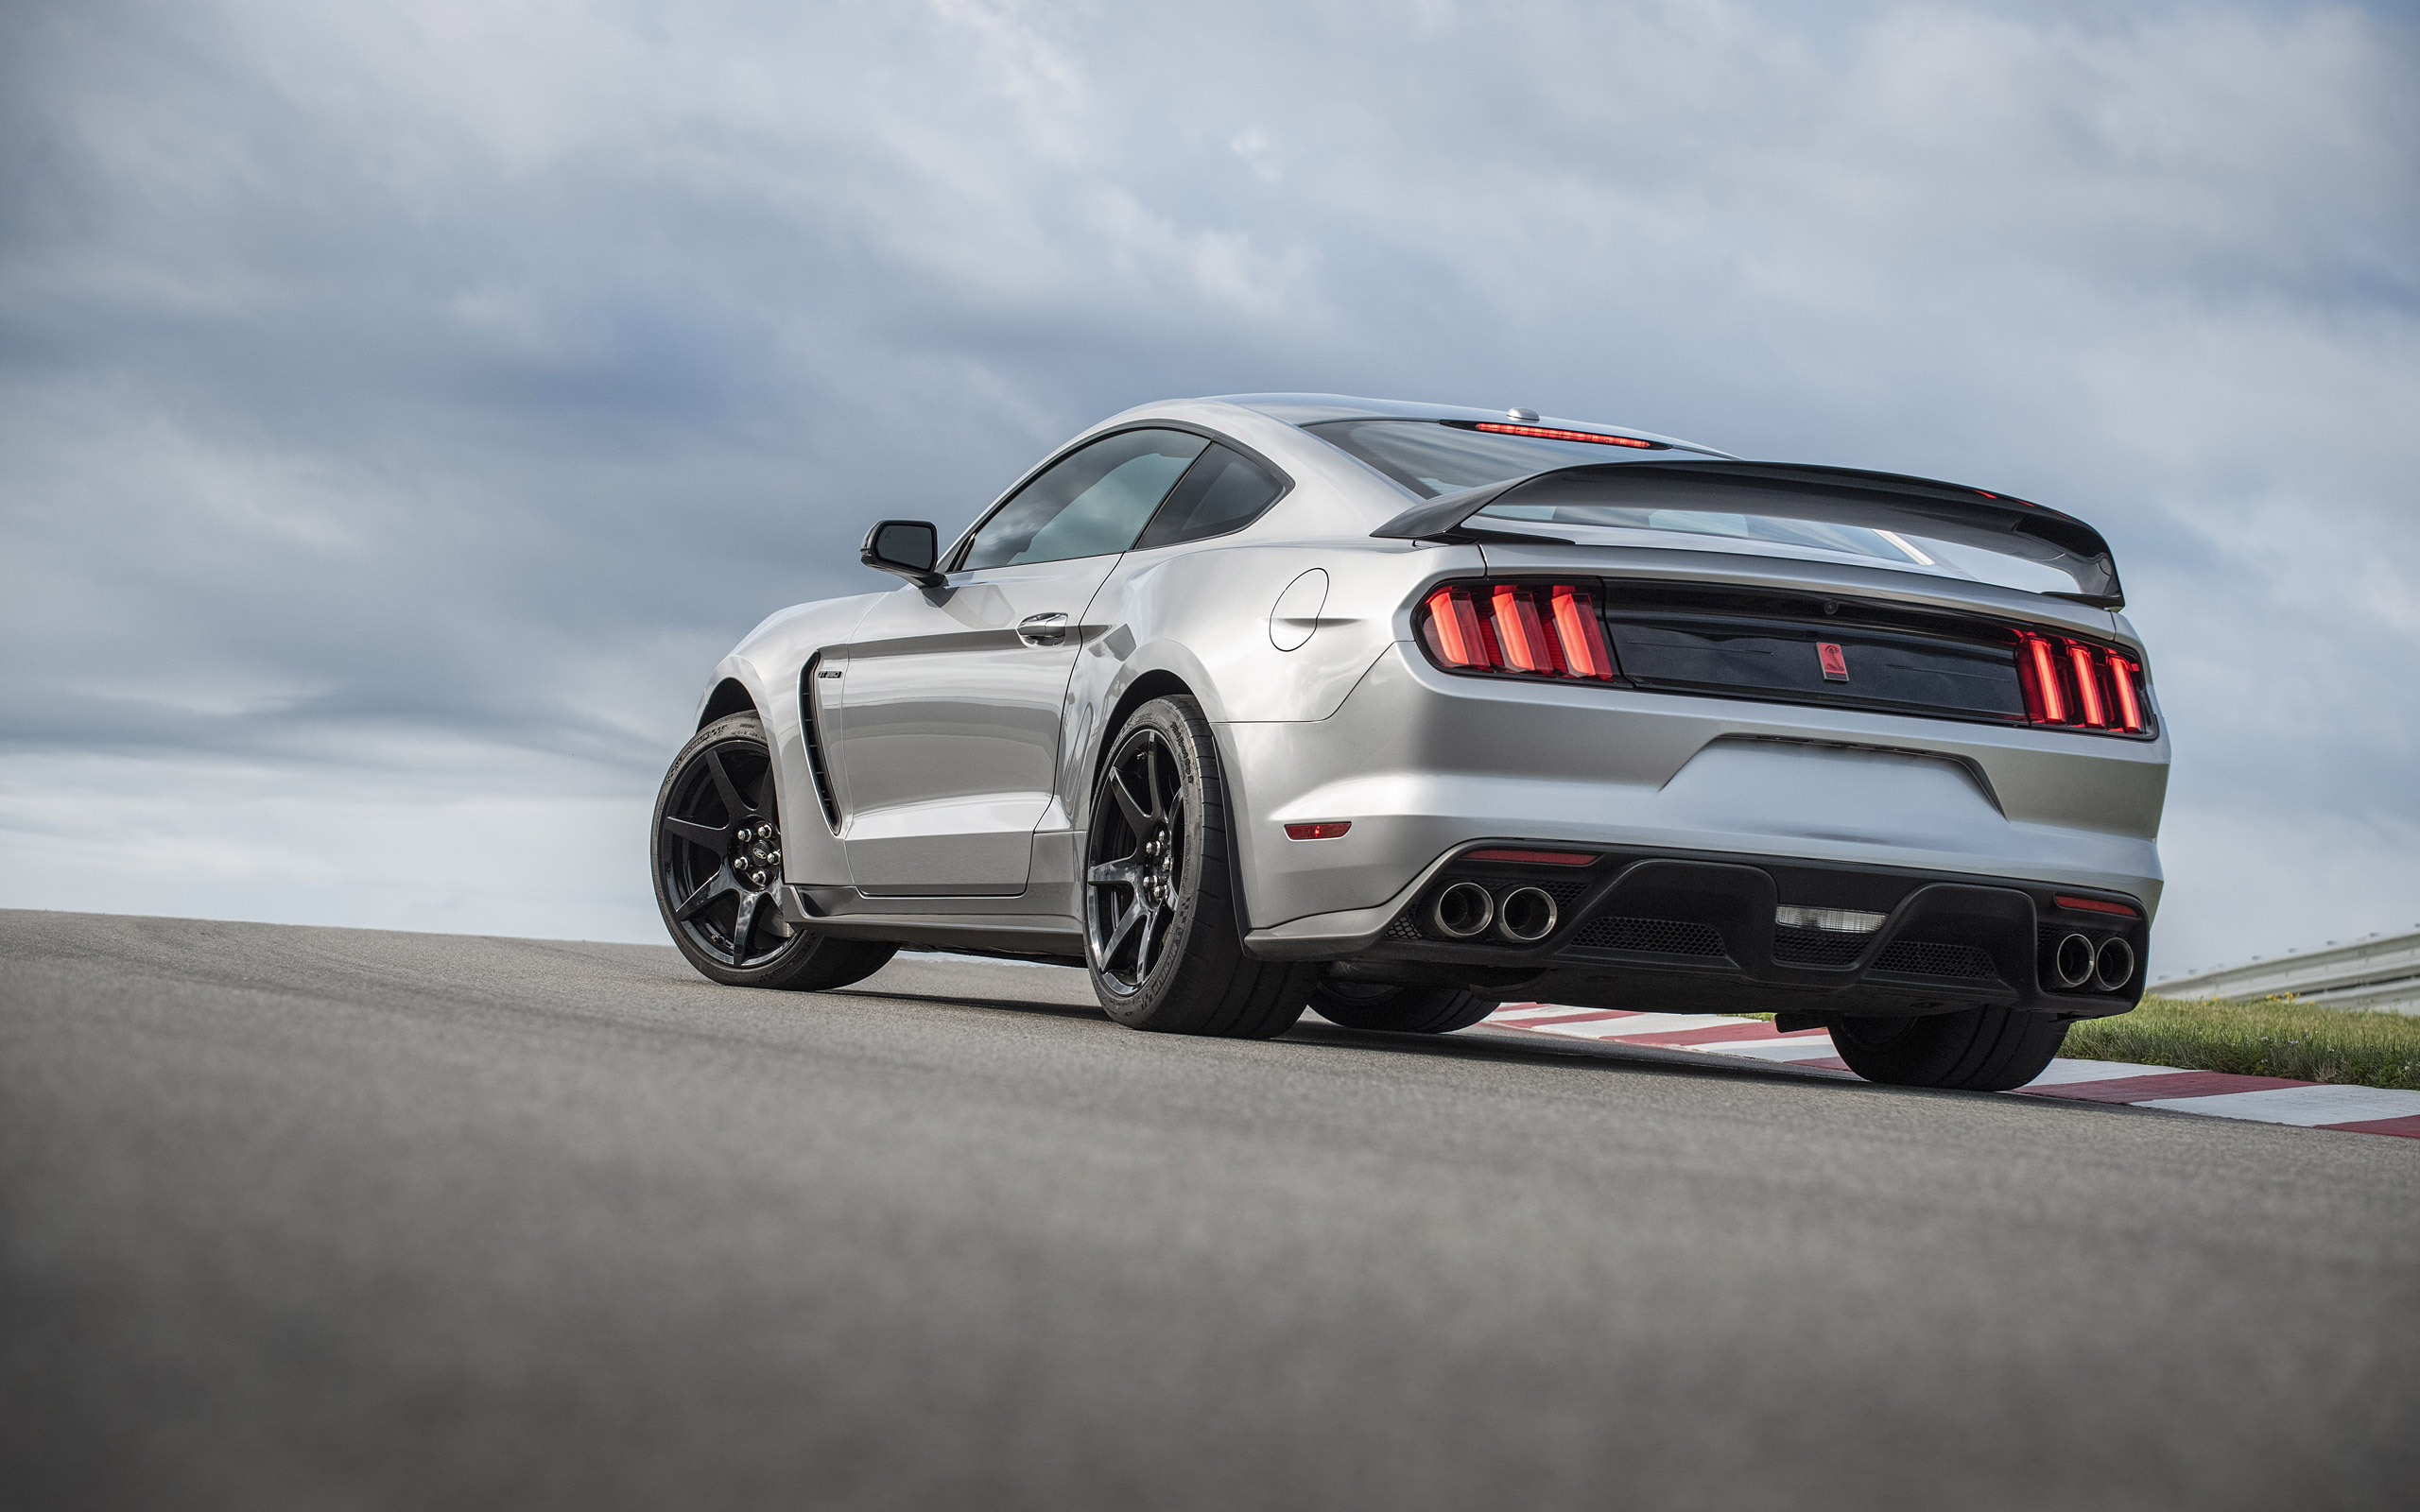  2020 Ford Mustang Shelby GT350R Wallpaper.